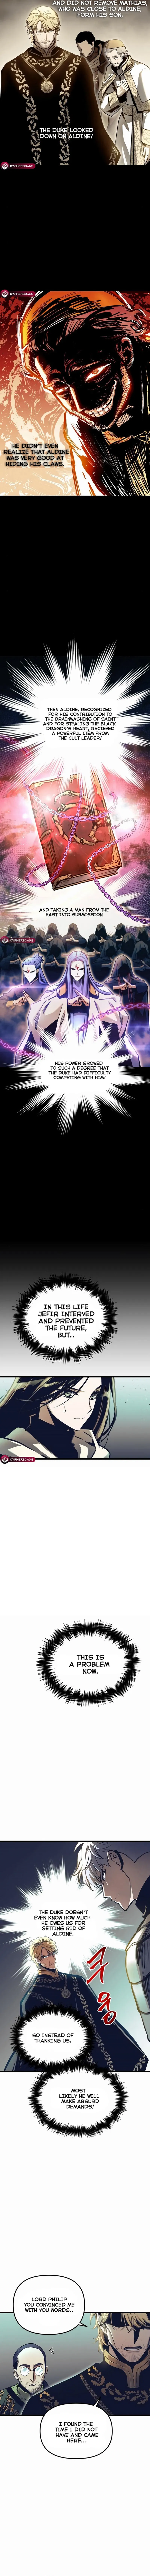 Reincarnation of the Suicidal Battle God Chapter 100 page 3